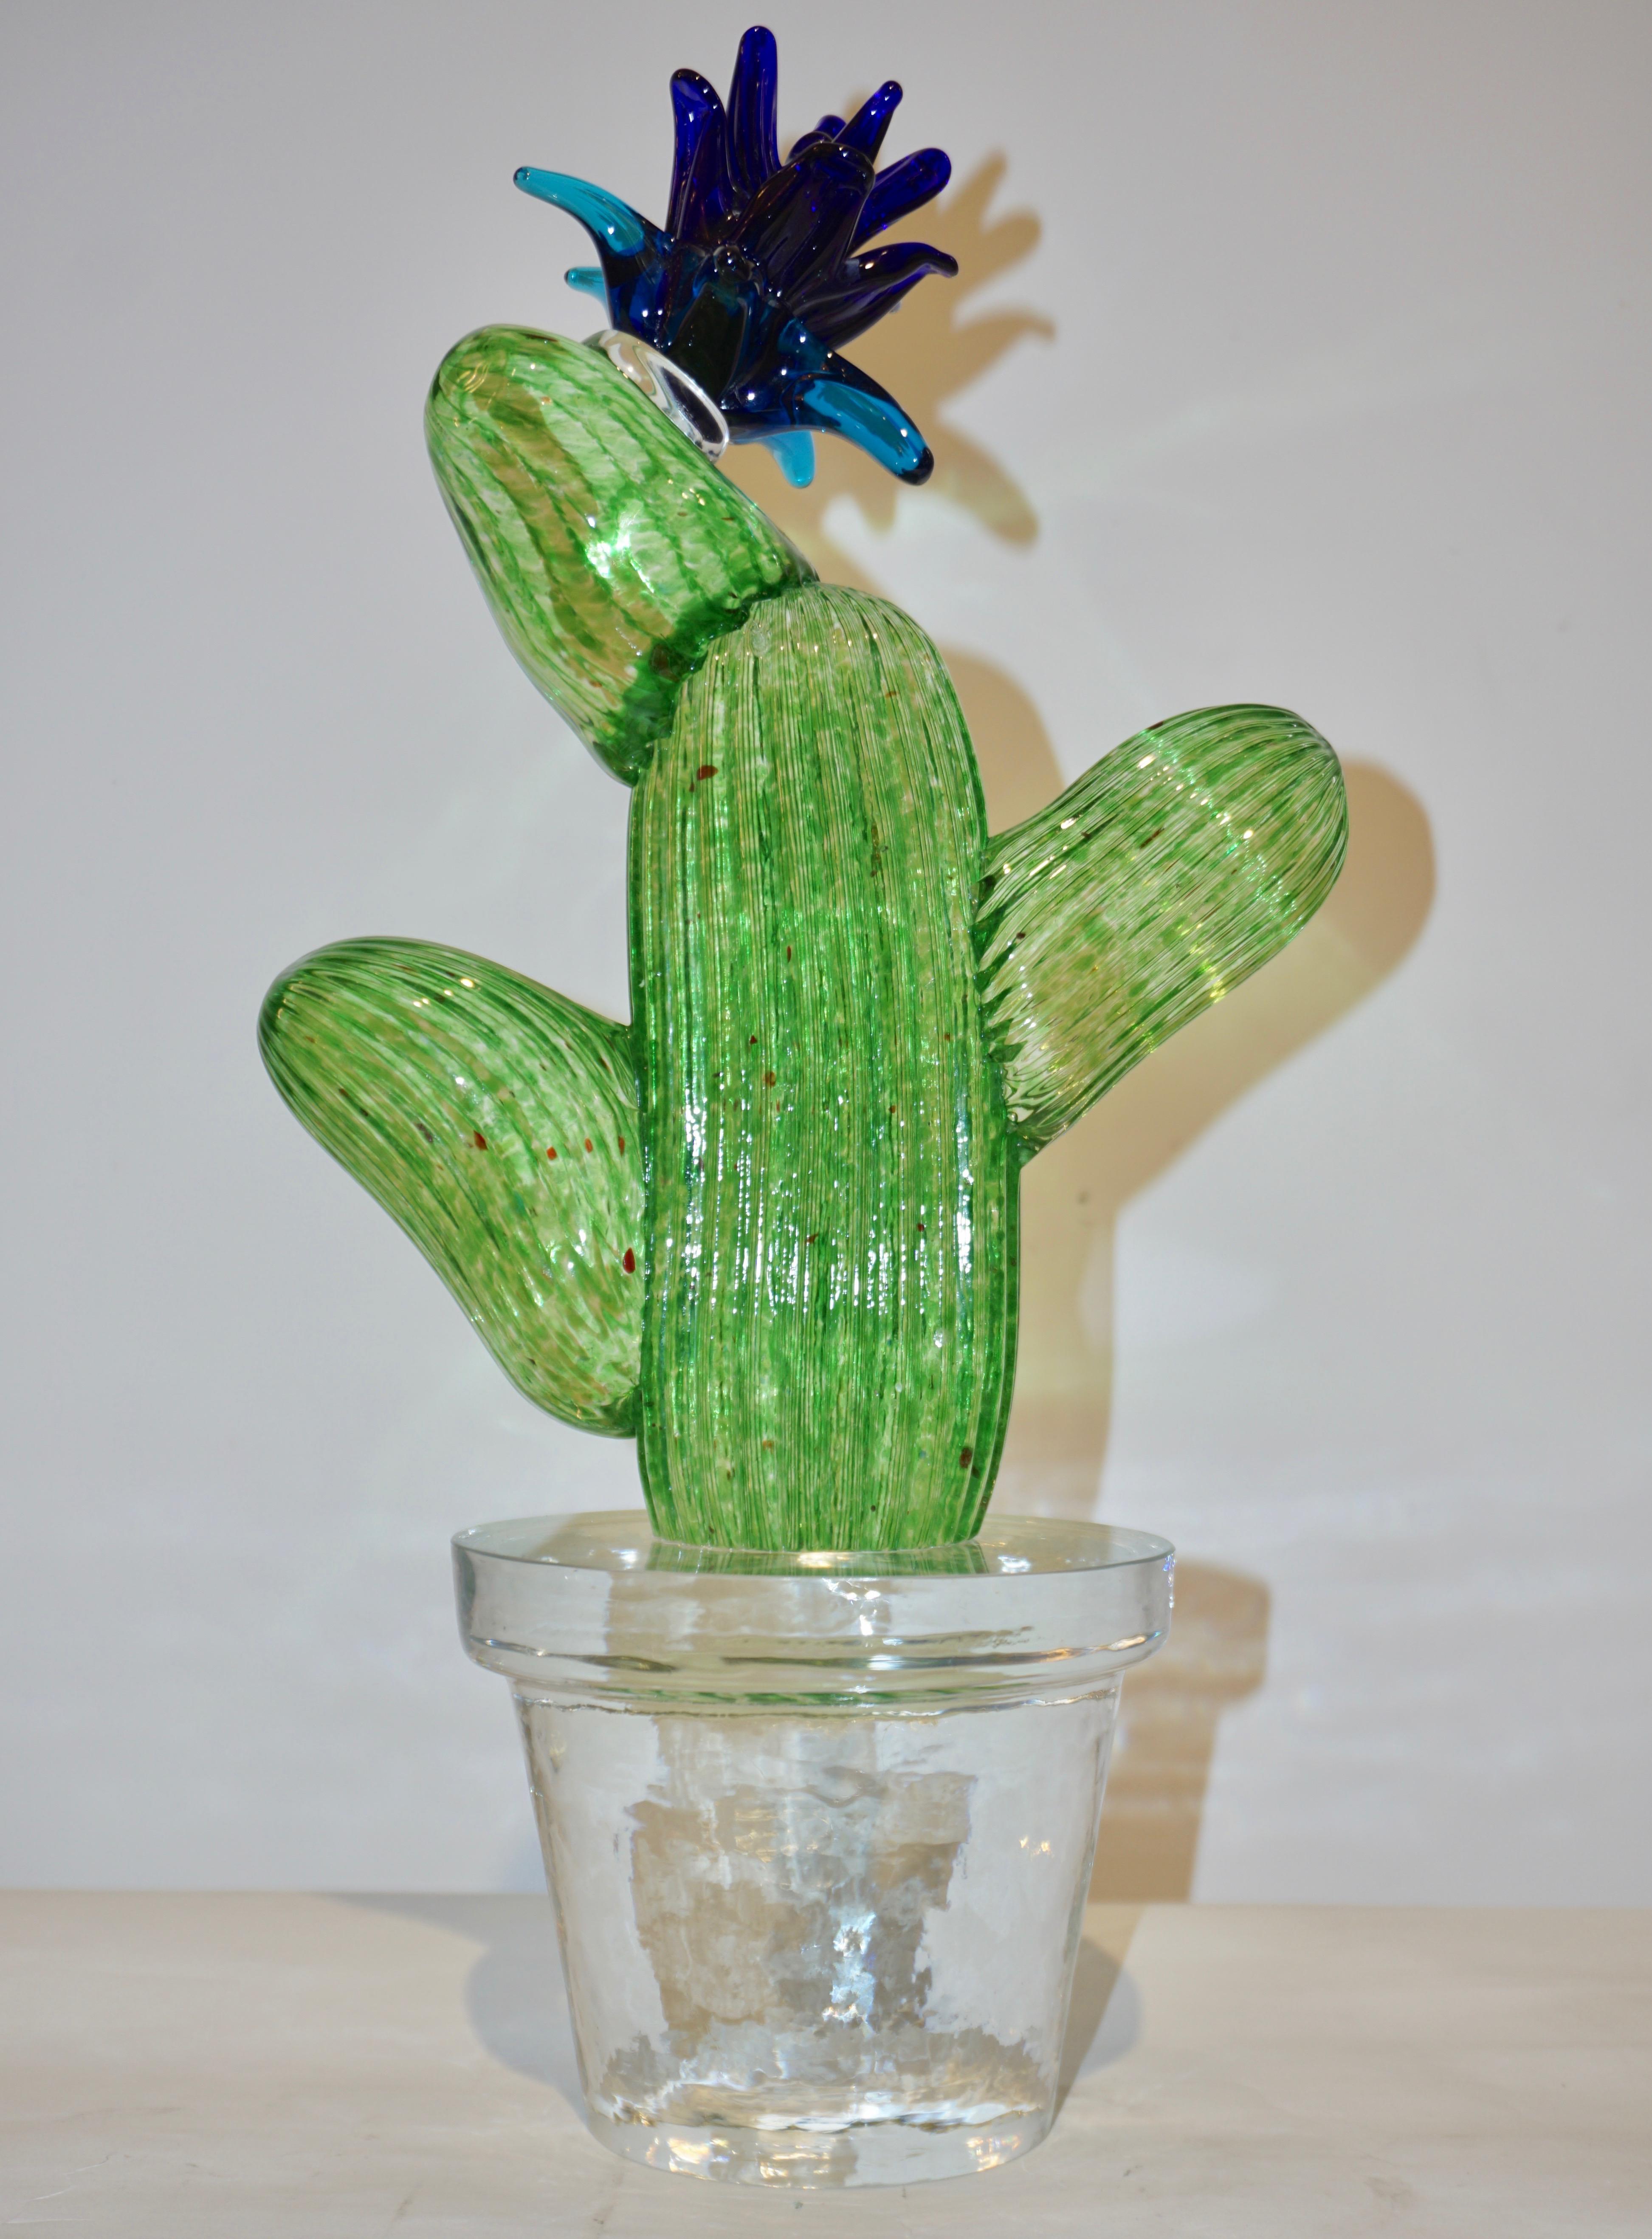 Art Glass Formia Marta Marzotto Vintage Limited Edition Murano Glass Blue Cactus Plant